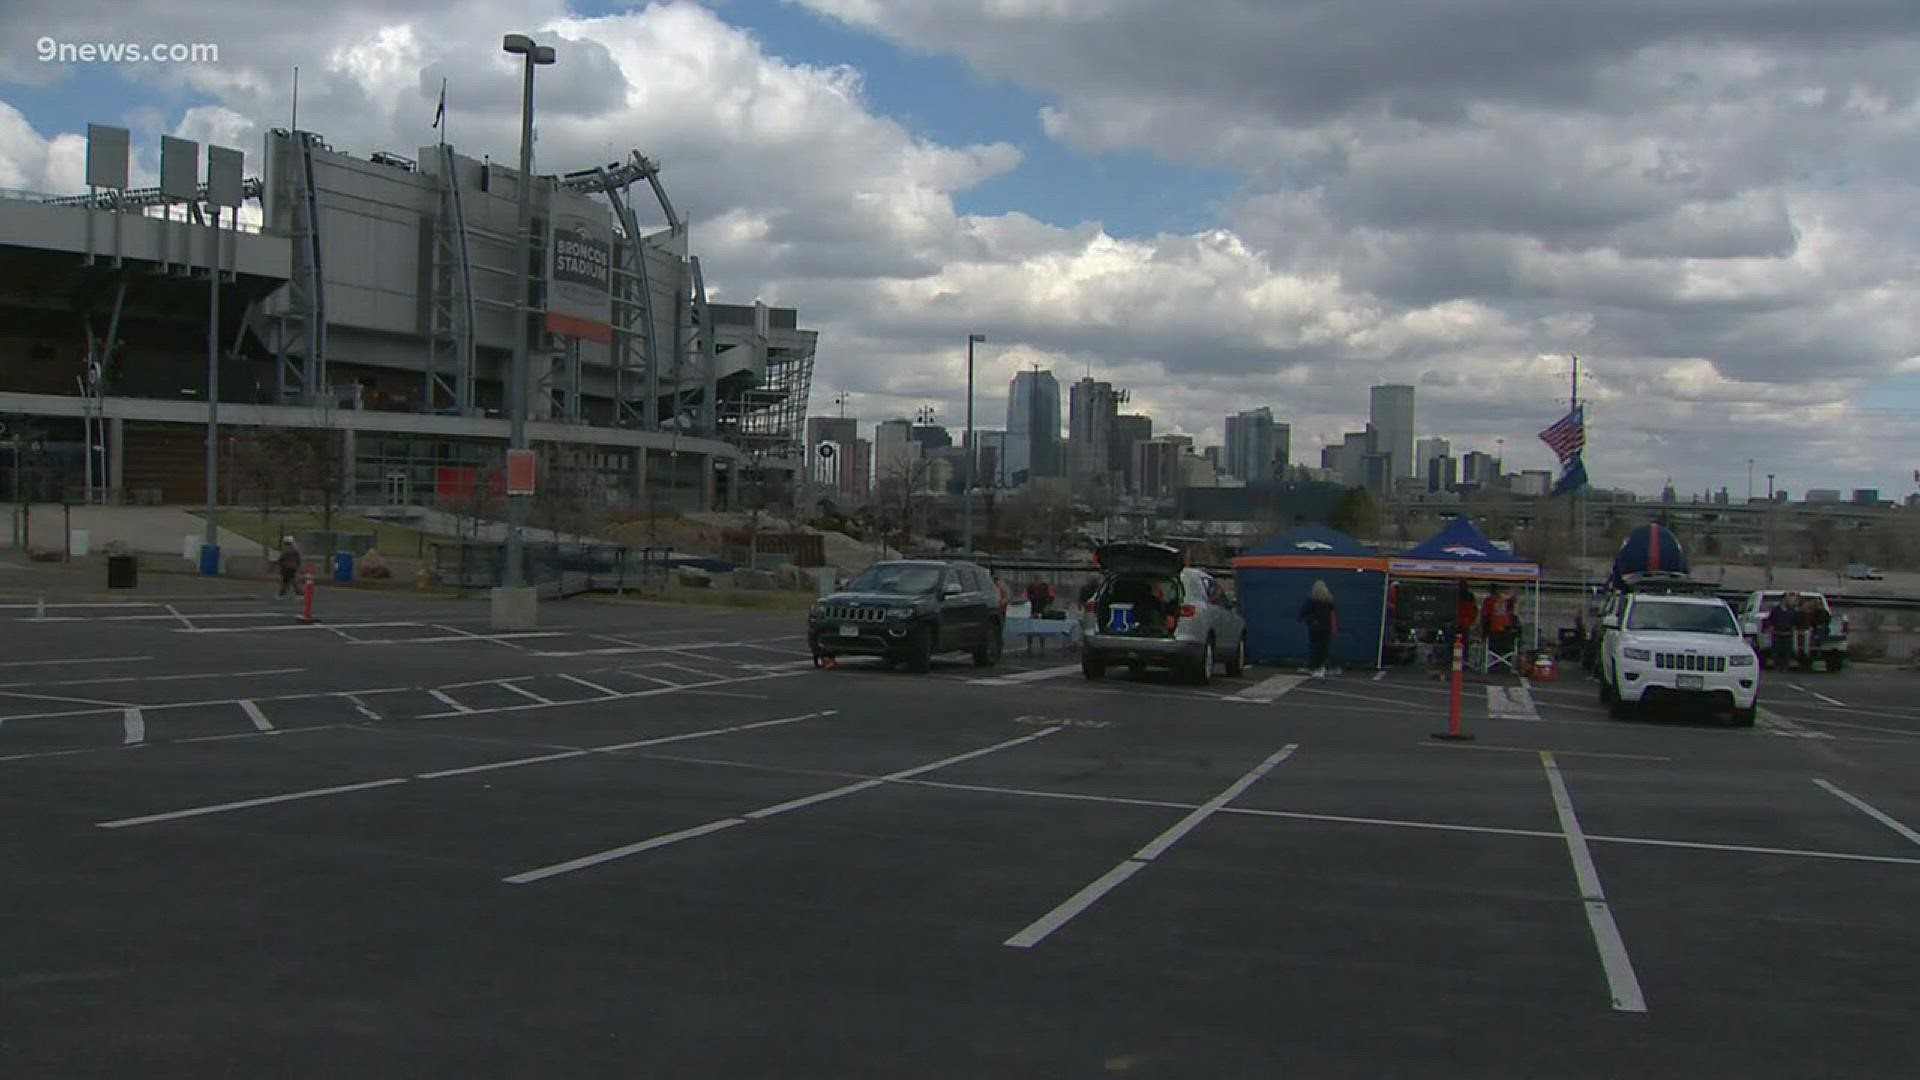 A boy with only a few weeks to live got to experience a special Denver Broncos tailgate.